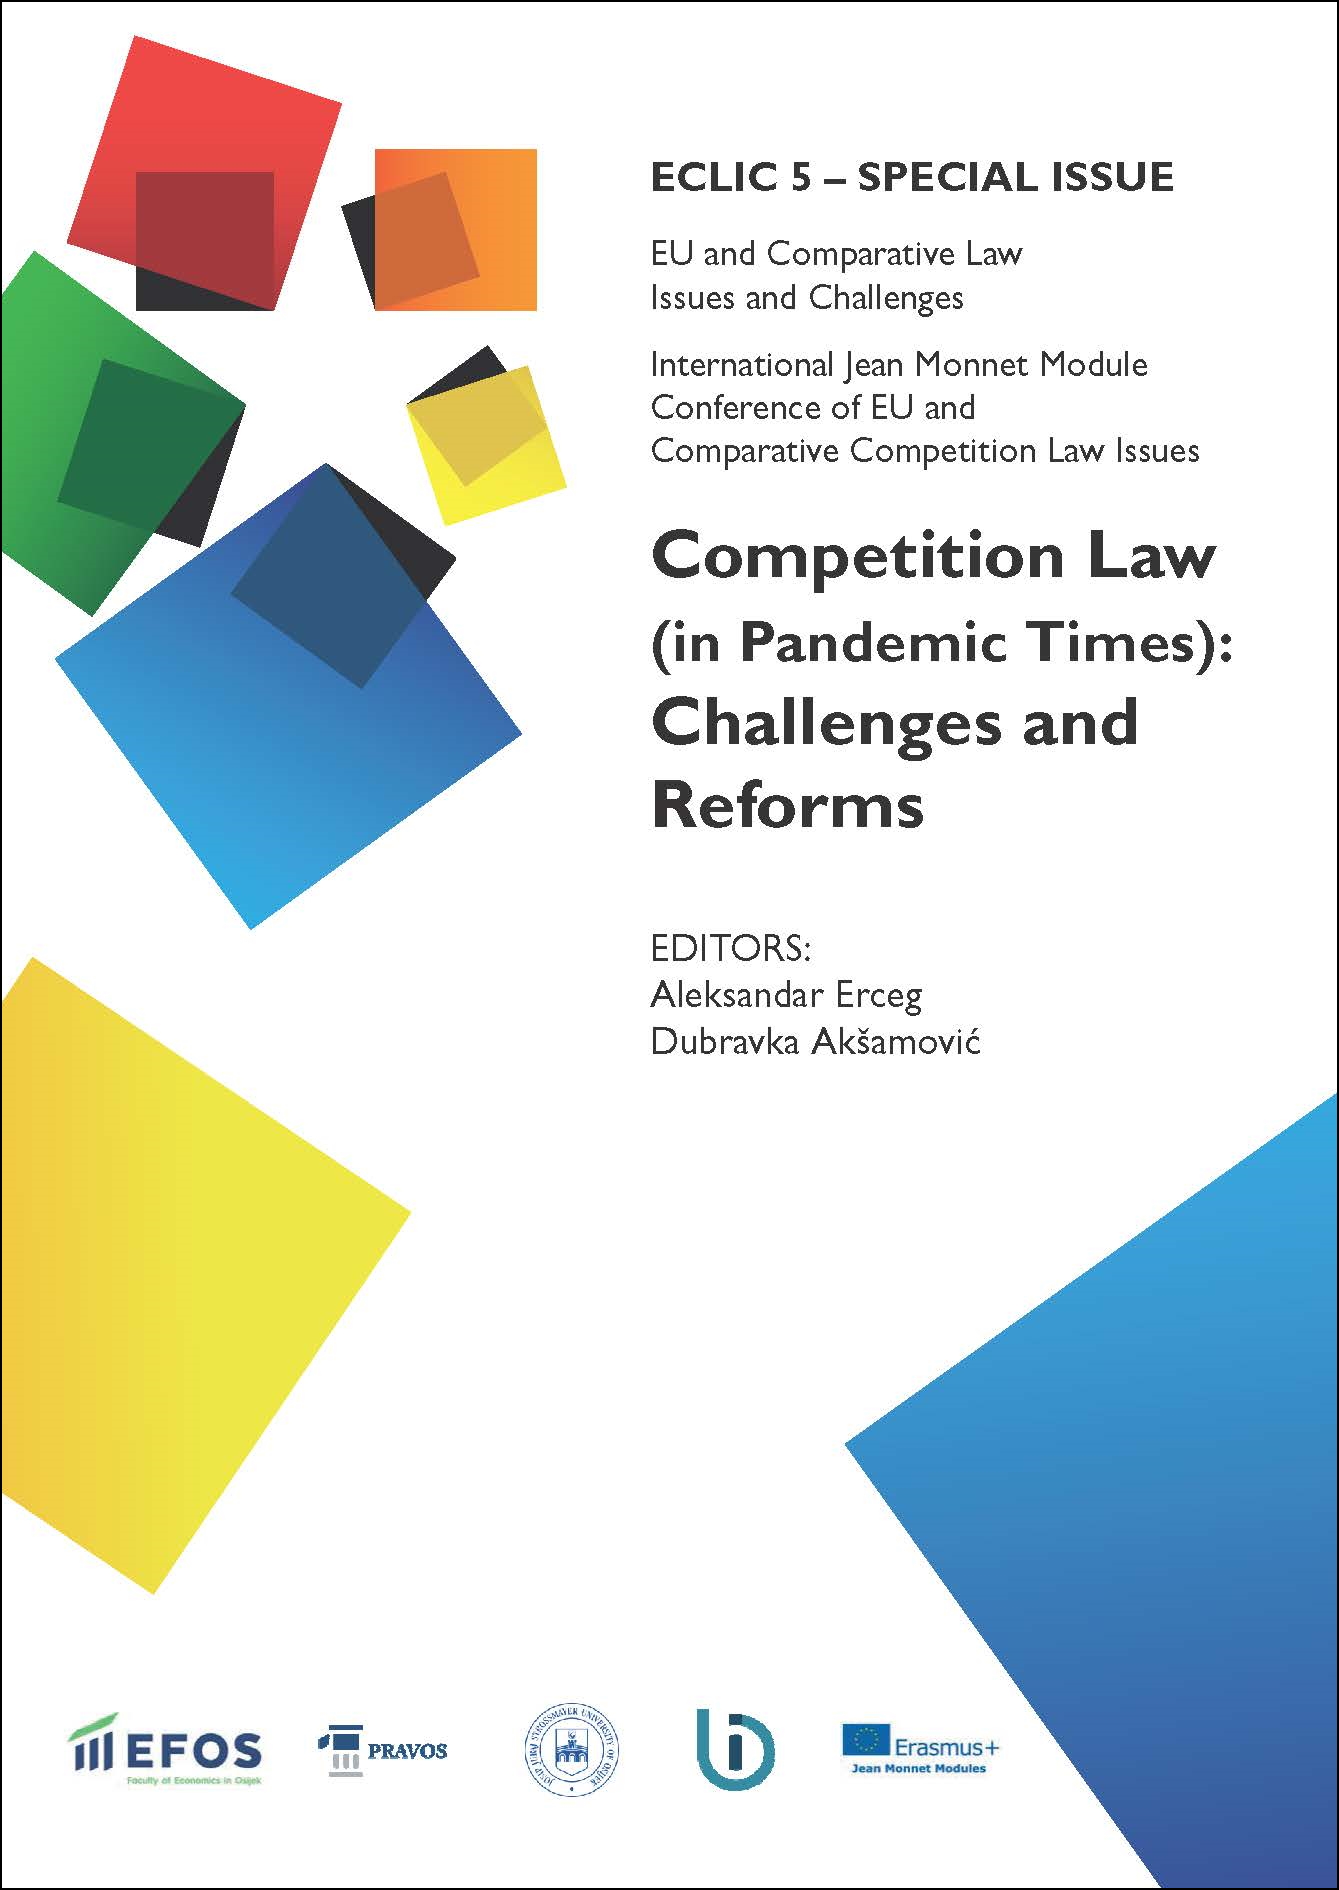 					View Vol. 5 (2021): SPECIAL ISSUE - COMPETITION LAW (IN PANDEMIC TIMES): CHALLENGES AND REFORMS
				